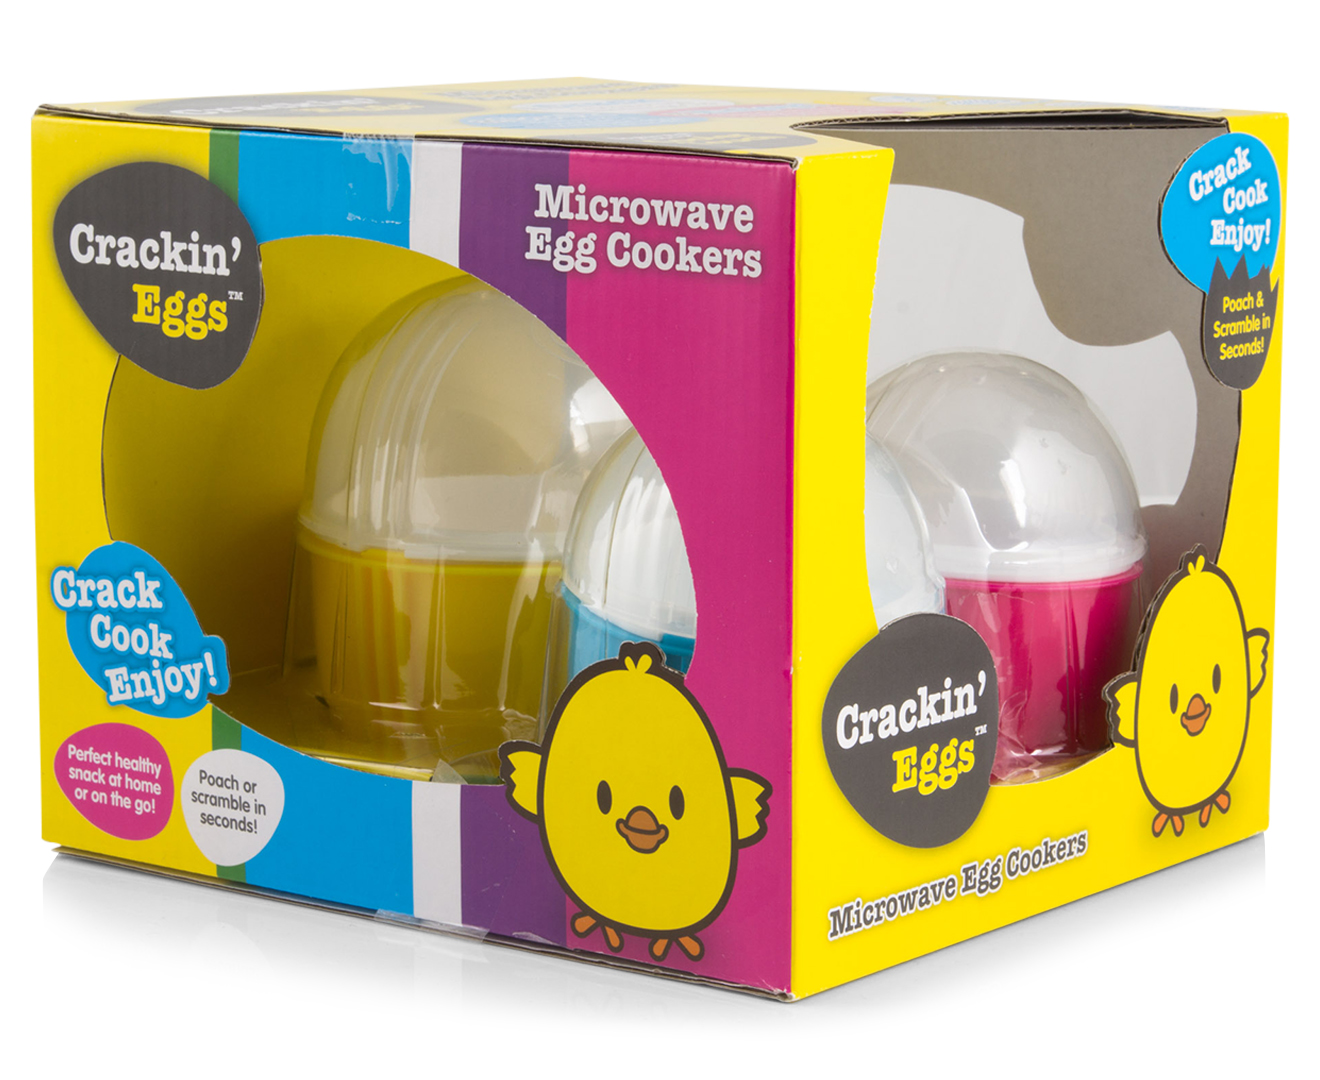 Crackin' Eggs Microwave Egg Cookers 3-Pack | Catch.com.au